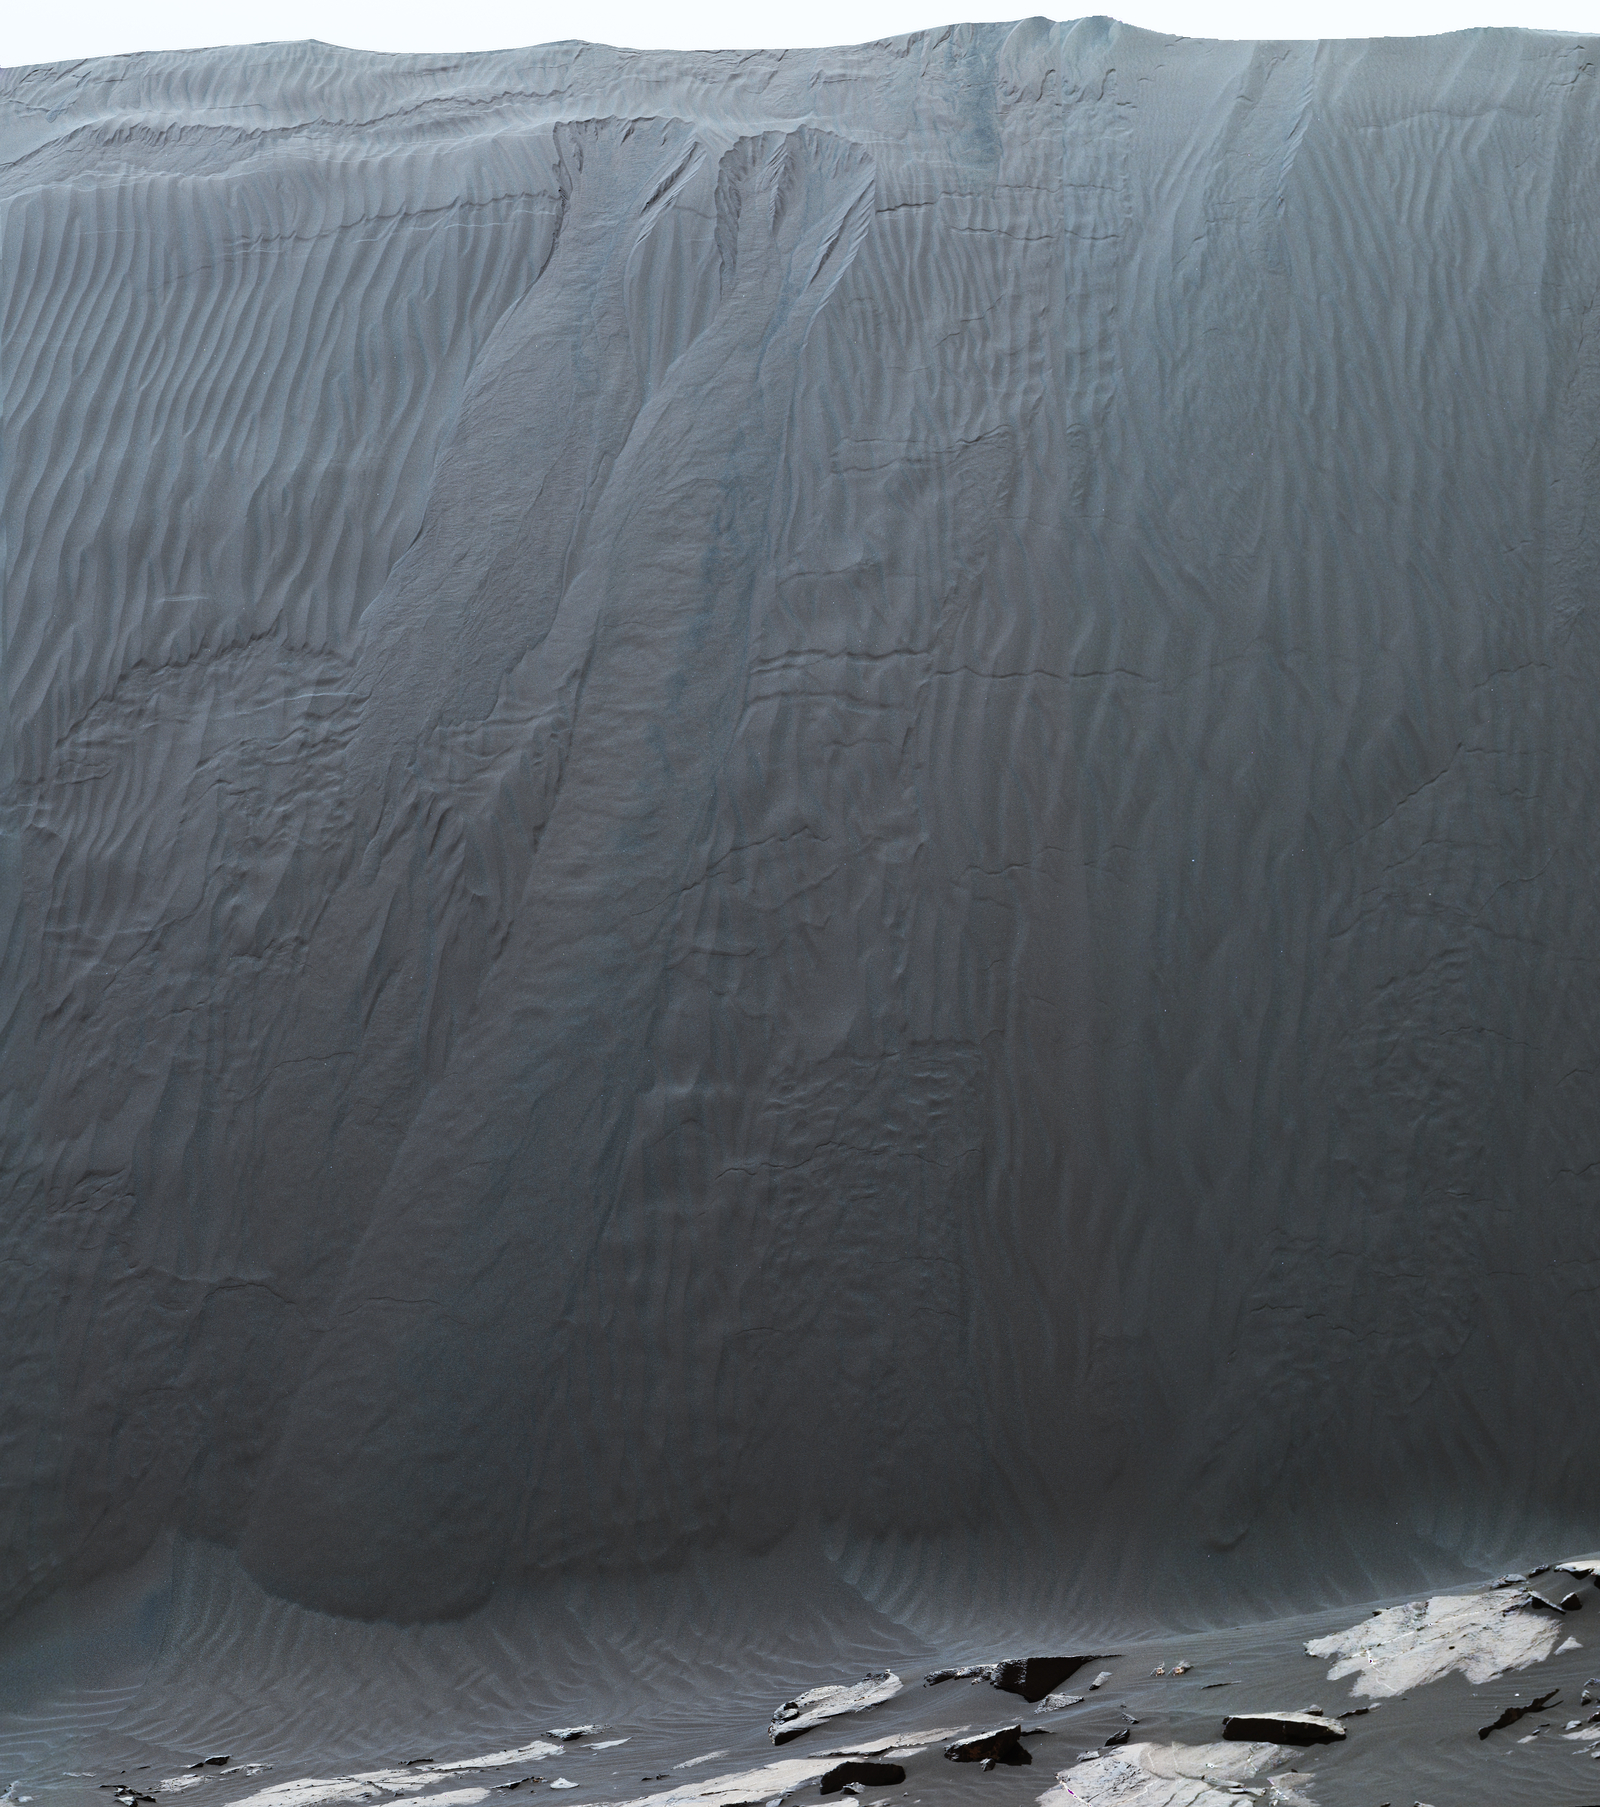 This Dec. 17, 2015, view combines multiple images from the telephoto-lens camera of the Mast Camera (Mastcam) on NASA's Curiosity Mars rover to reveal fine details of the downwind face of "Namib Dune." Sand on this face of the dark dune has cascaded down a slope of about 26 to 28 degrees.